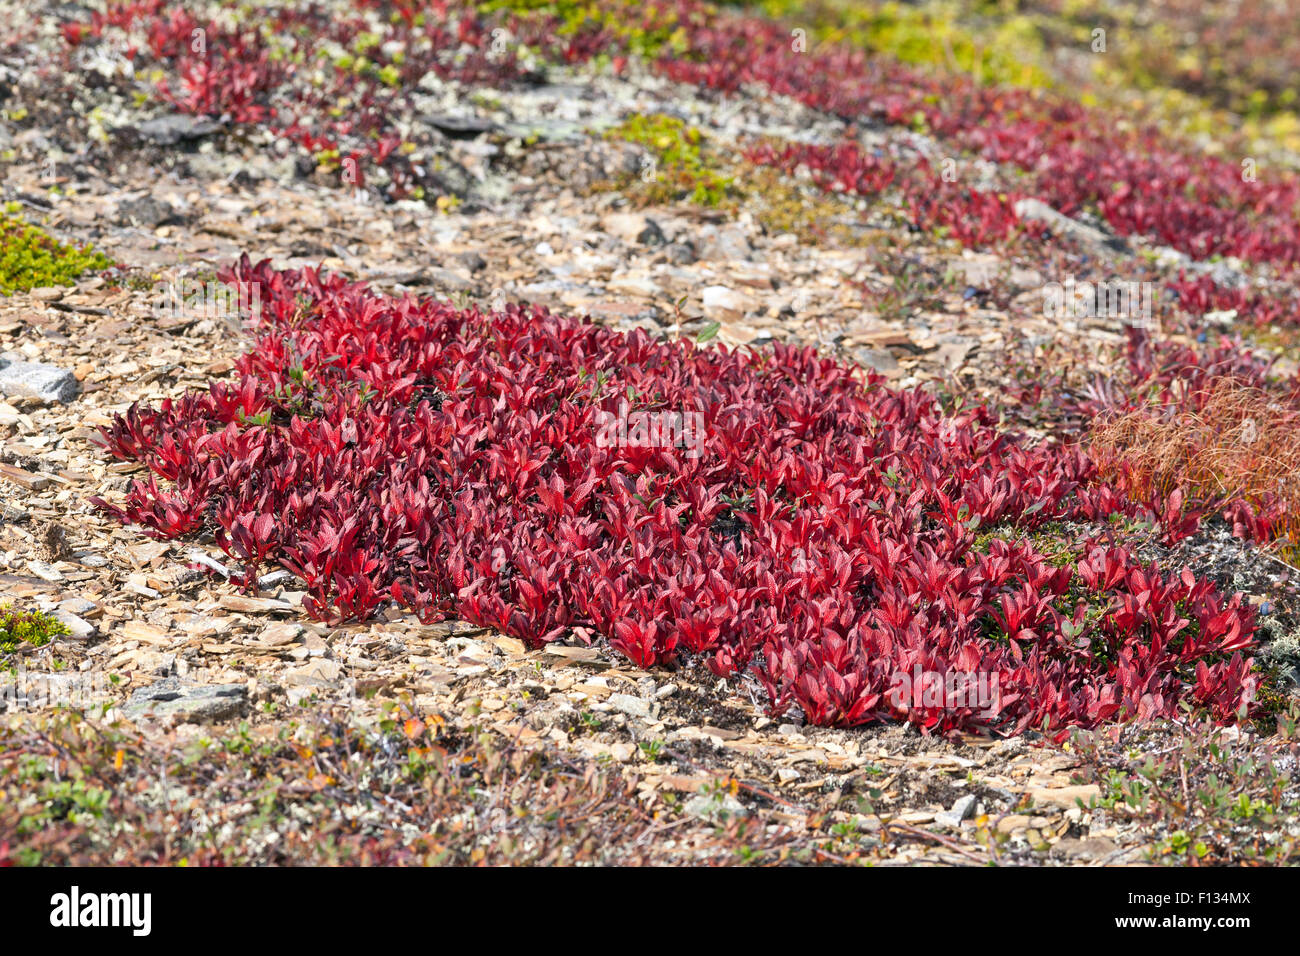 Arctostaphylos alpinus Sprengel on a mountain slope. Mountain Bear-berry, in close up. Red and orange leaves on the ground. Stock Photo